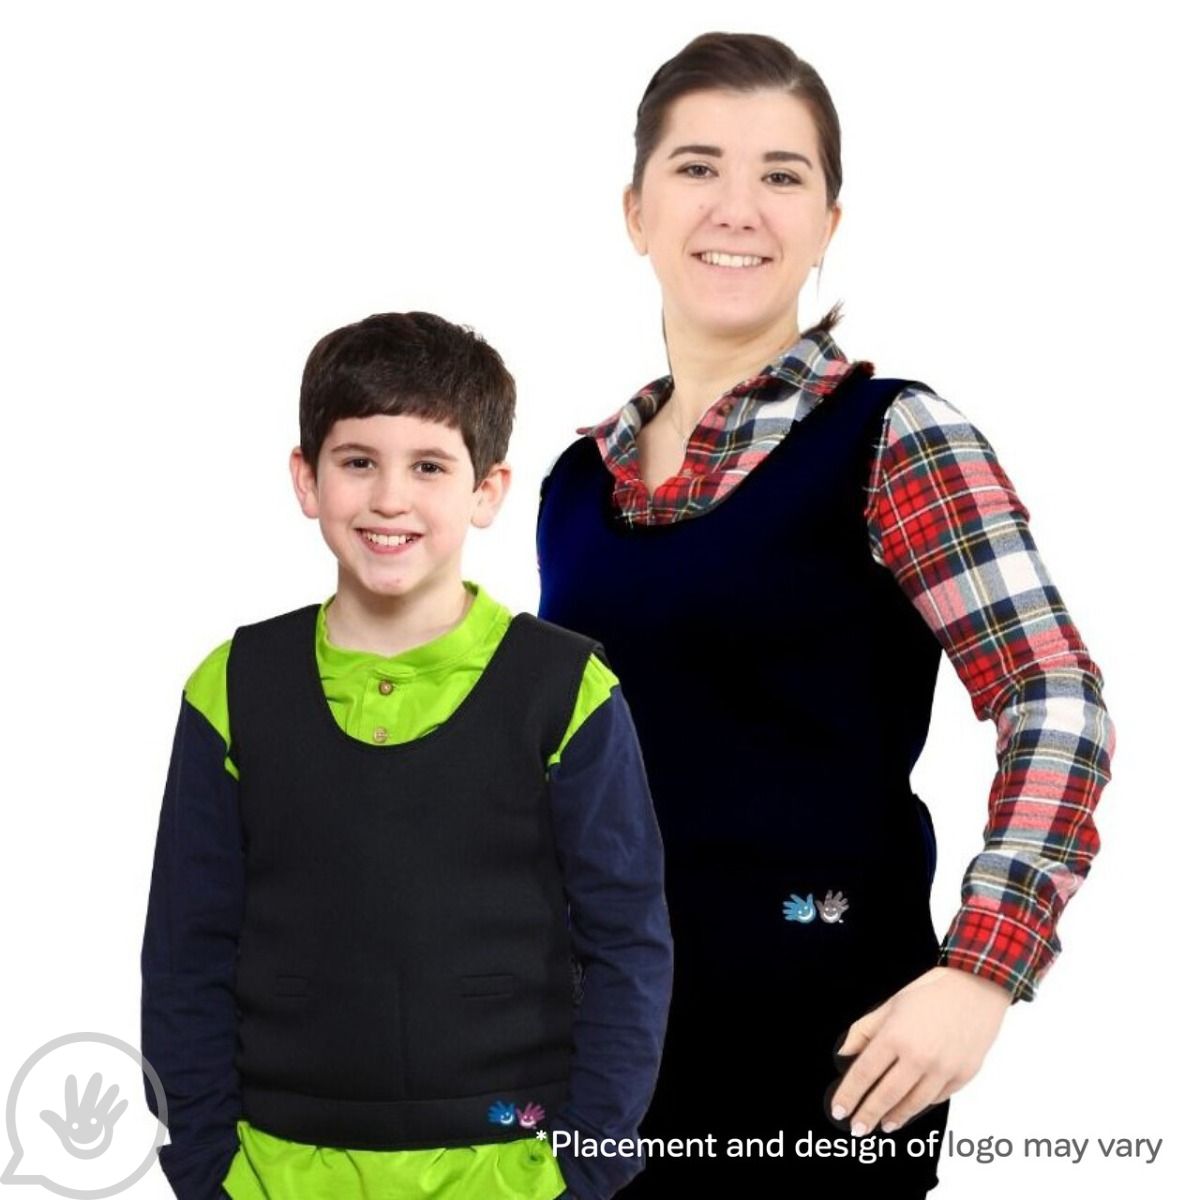 Weighted Vest for Kids | Compression Vest for Kids with Sensory Issues,  Autism, ADHD | Children Pressure Vest Includes 6 Removable Weights | Kids